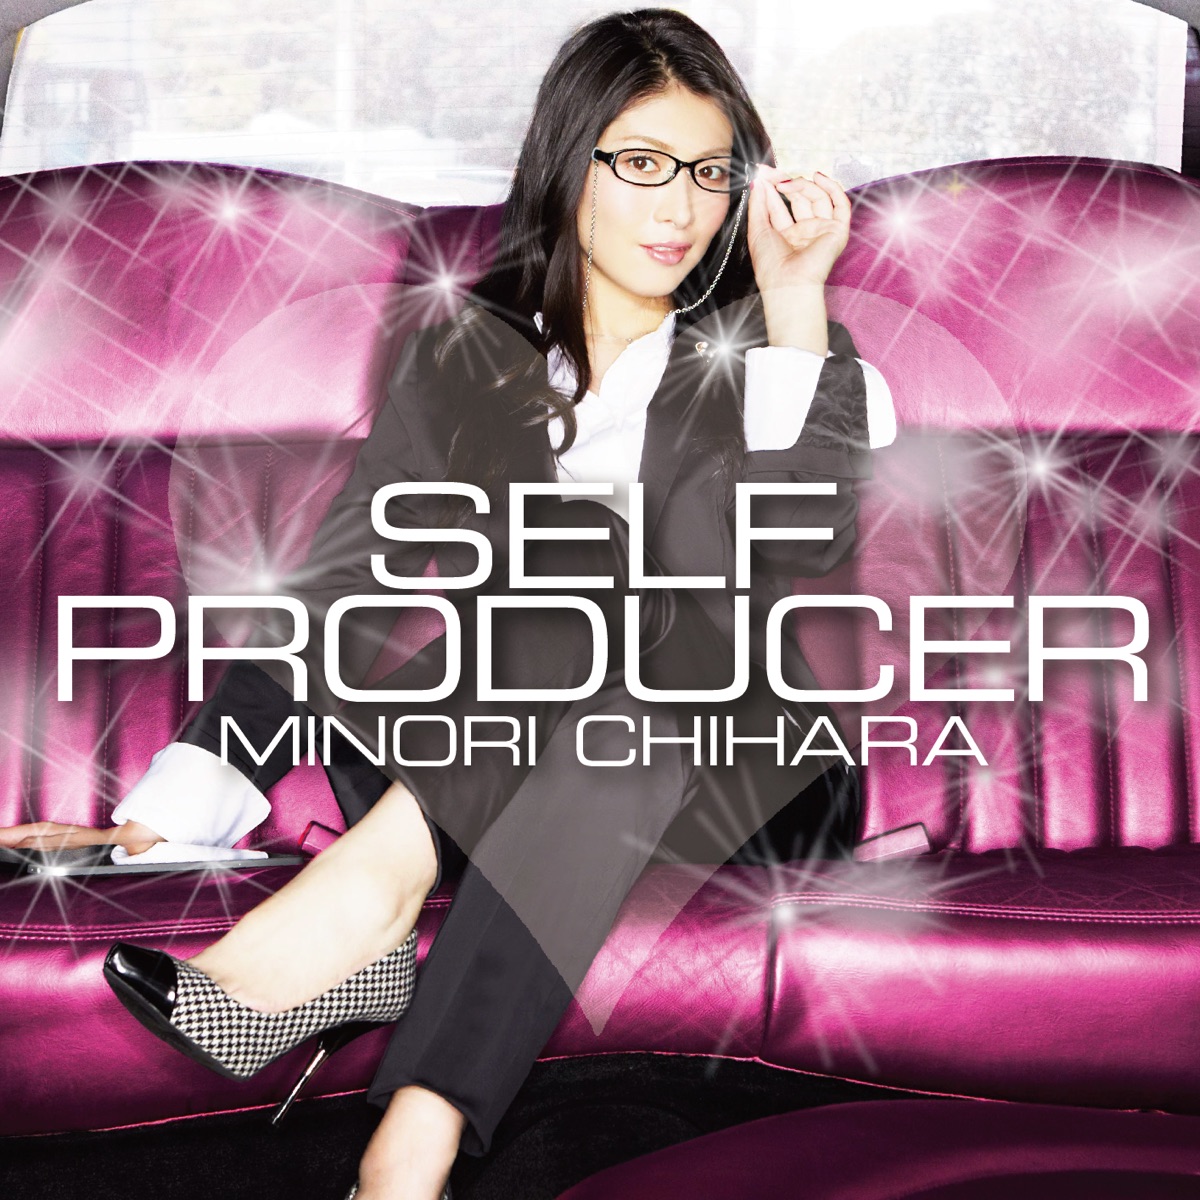 Cover for『Minori Chihara - SELF PRODUCER』from the release『SELF PRODUCER』